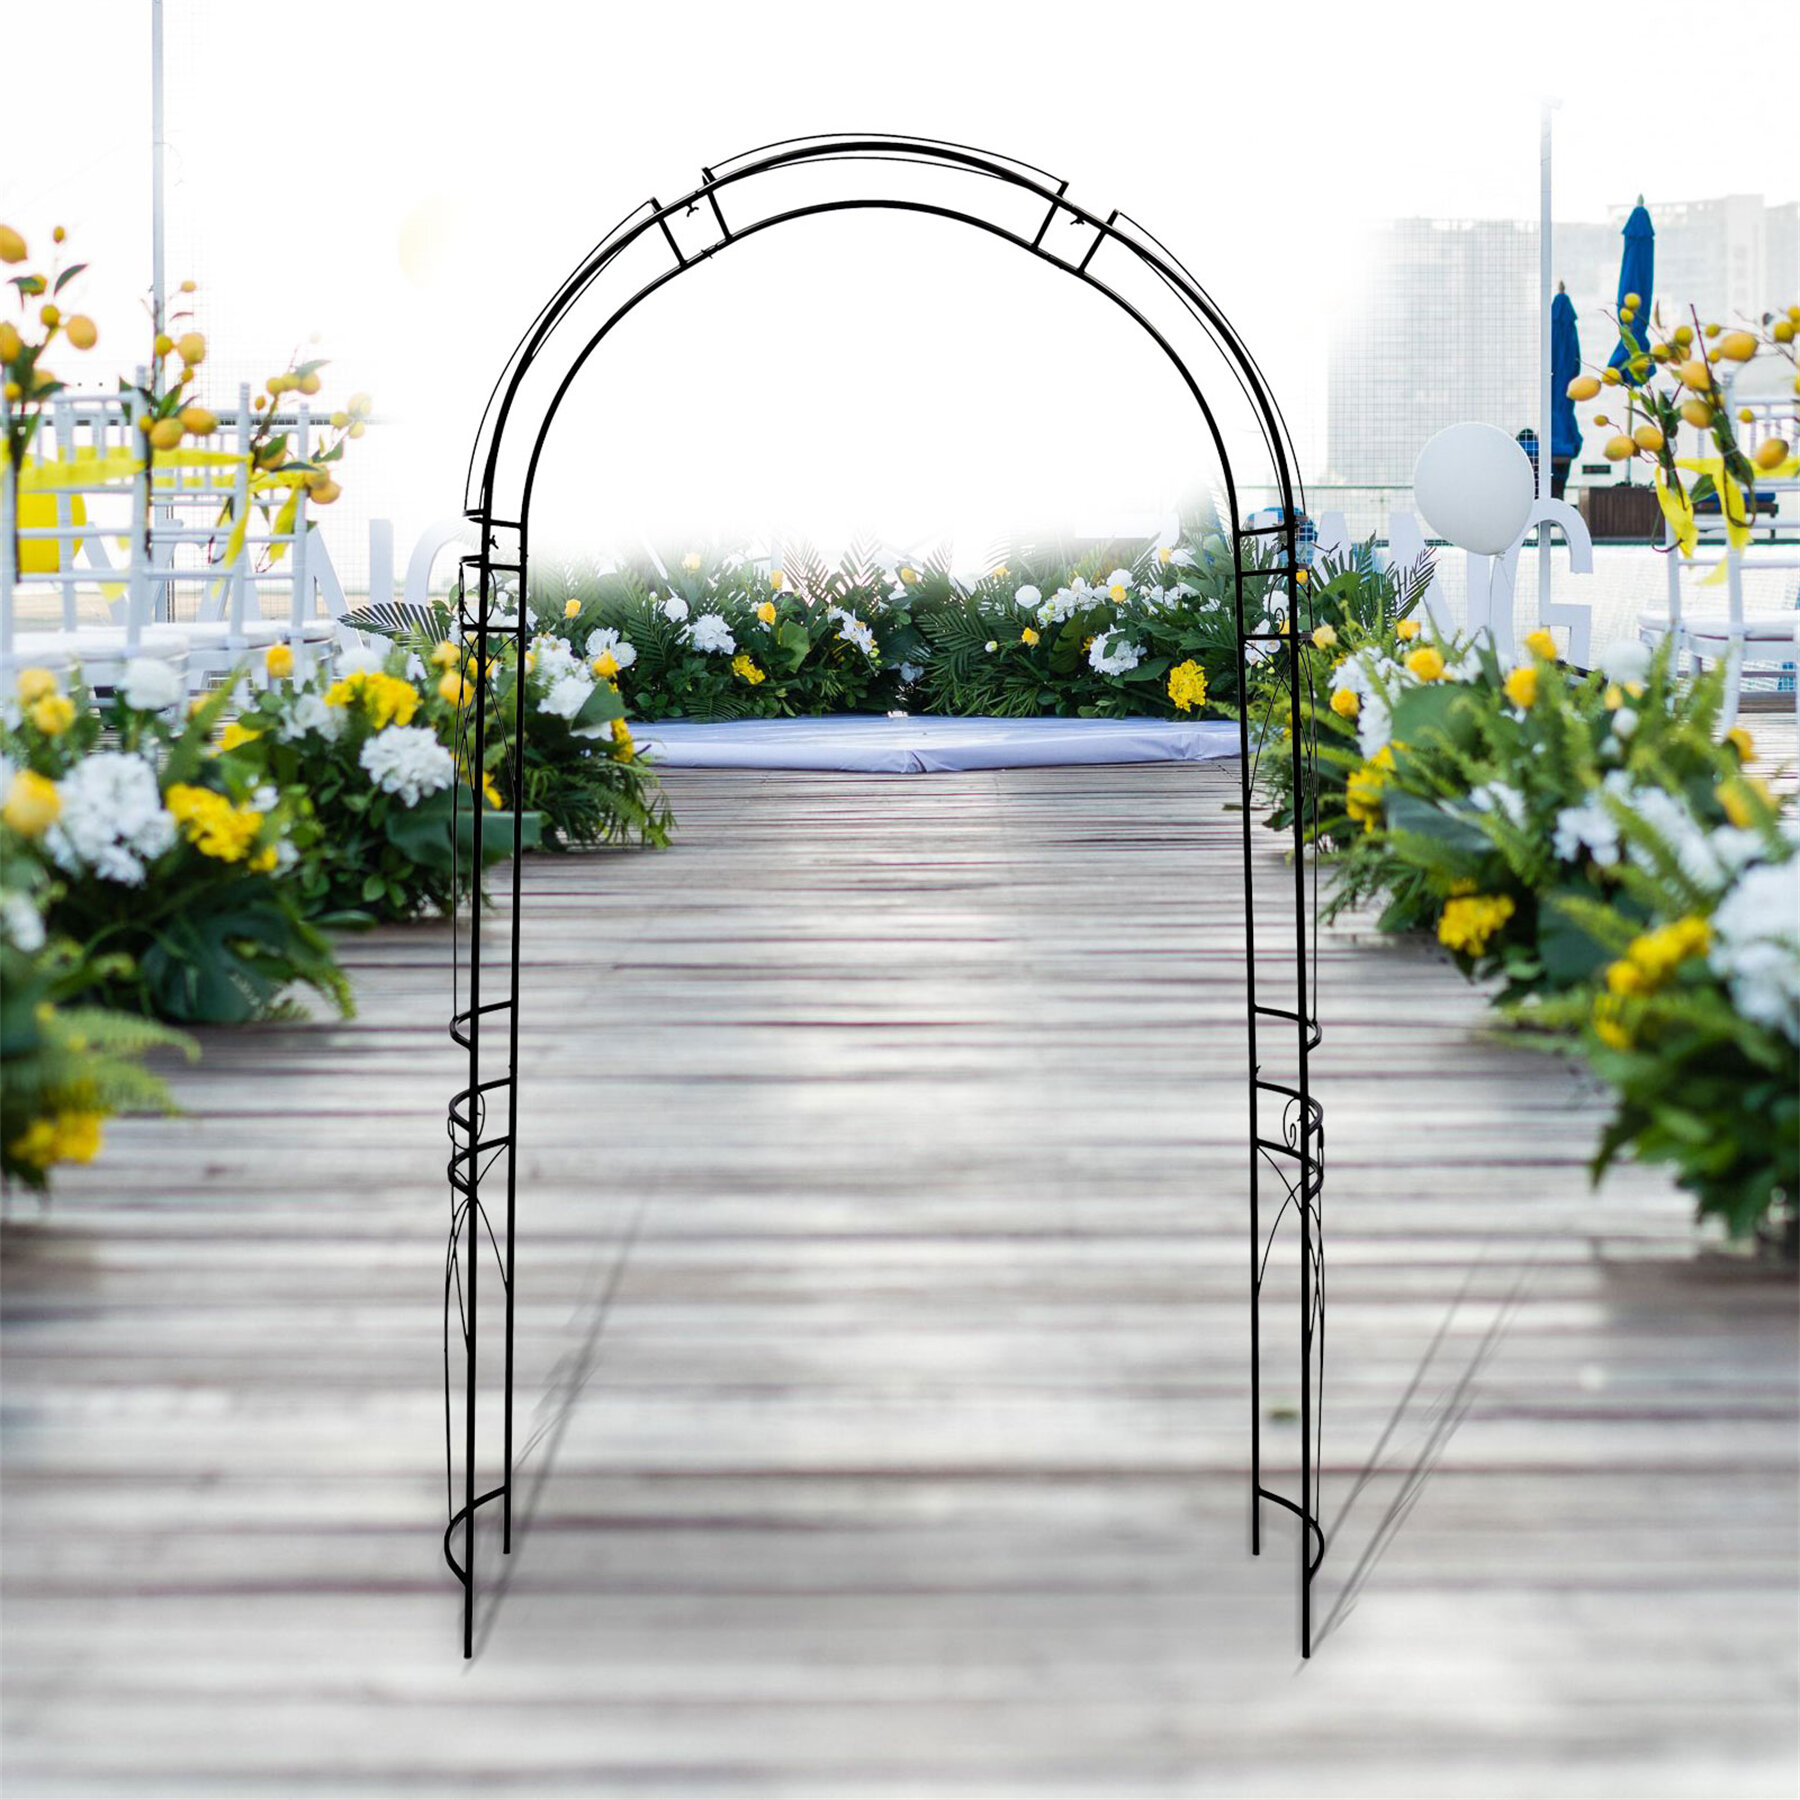 LIRU Army Metal Garden Arch and Wedding Arch Arbor Stand 7'9 High x4'6 Wide Outdoor and Indooor for Party Decoration Garden Climbing Flowers Plant 